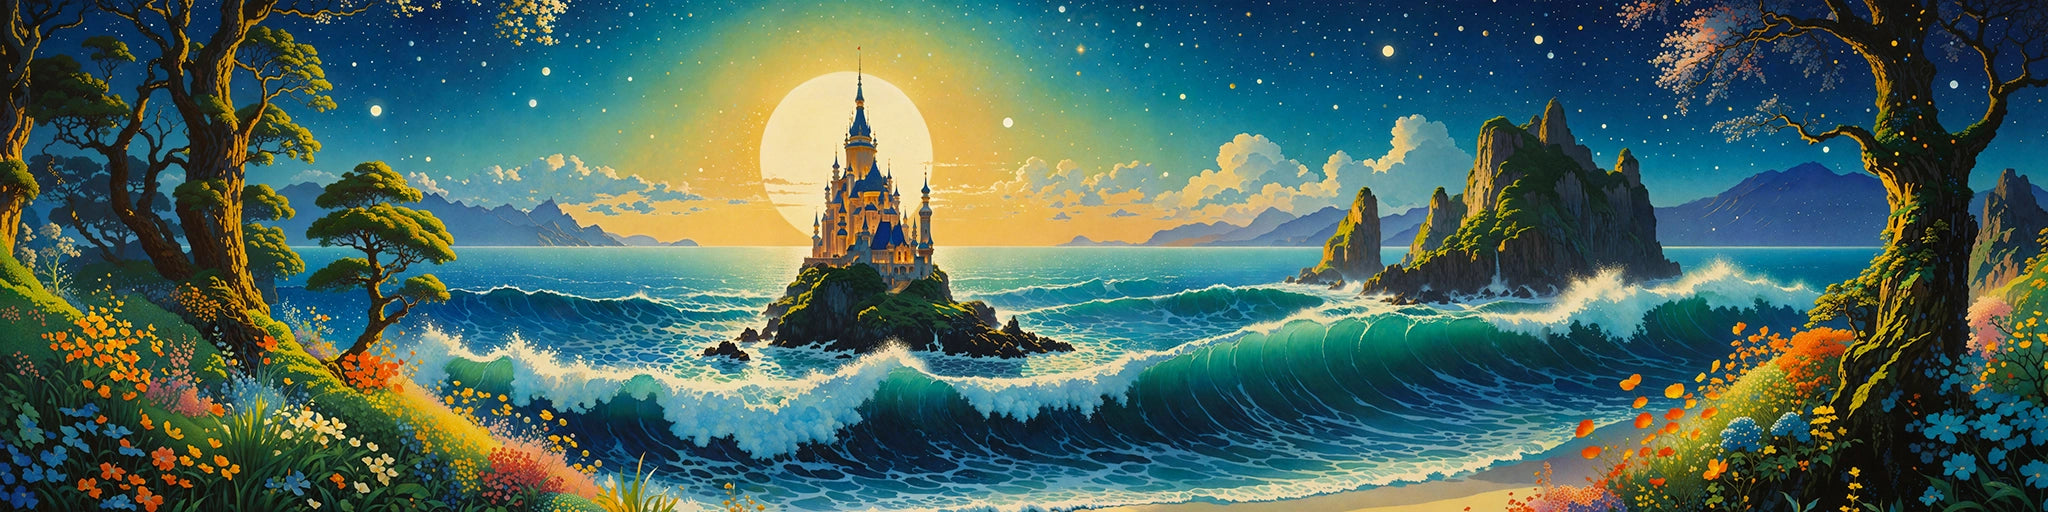 A painting of a castle on a island near a beach at sunset.